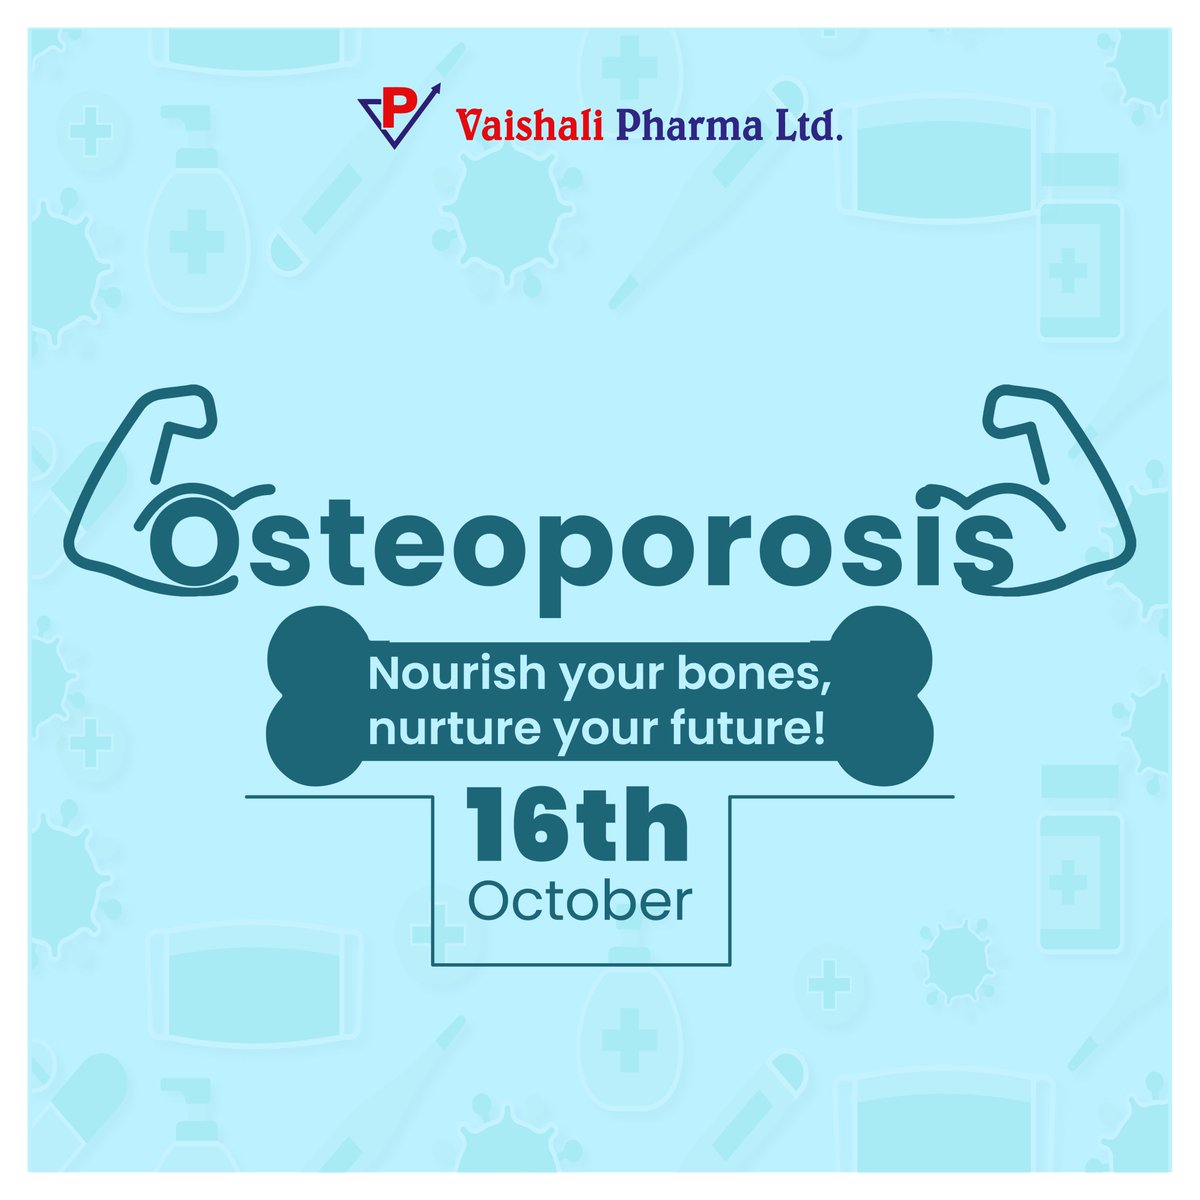 To avoid any future complications in bone health, #WorldOsteoporosisDay with the help of concerned organizations & people around the world to create awareness.

#VaishaliPharma #pharmacy #osteoporosis #bonehealth #pharmaceutical #nutraceutical #bonedensity #stayfit #healthy #bone